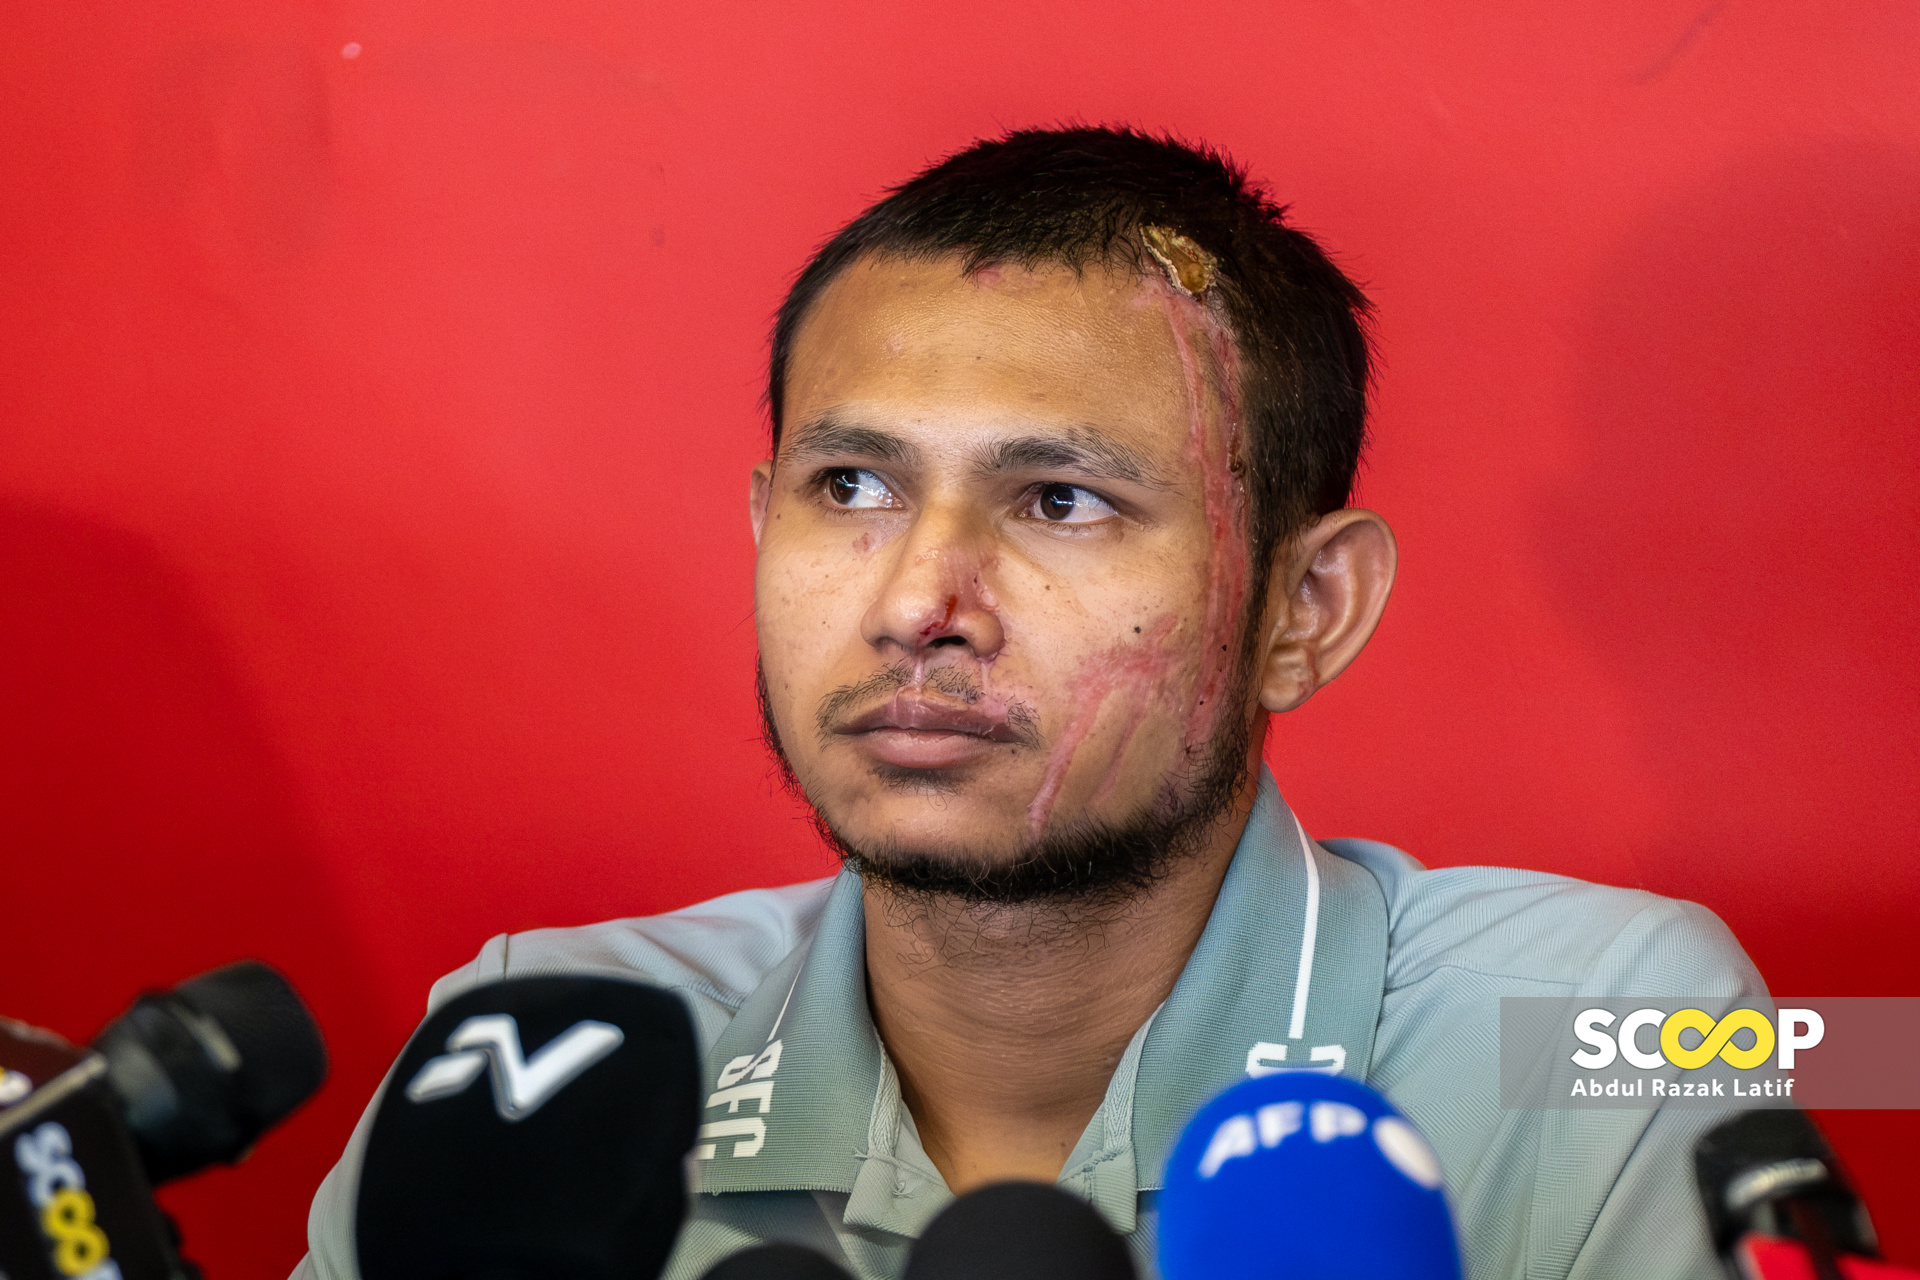 Faisal considered giving up 7-figure salary after attack, pledges to no longer be ‘Mr Nice Guy’